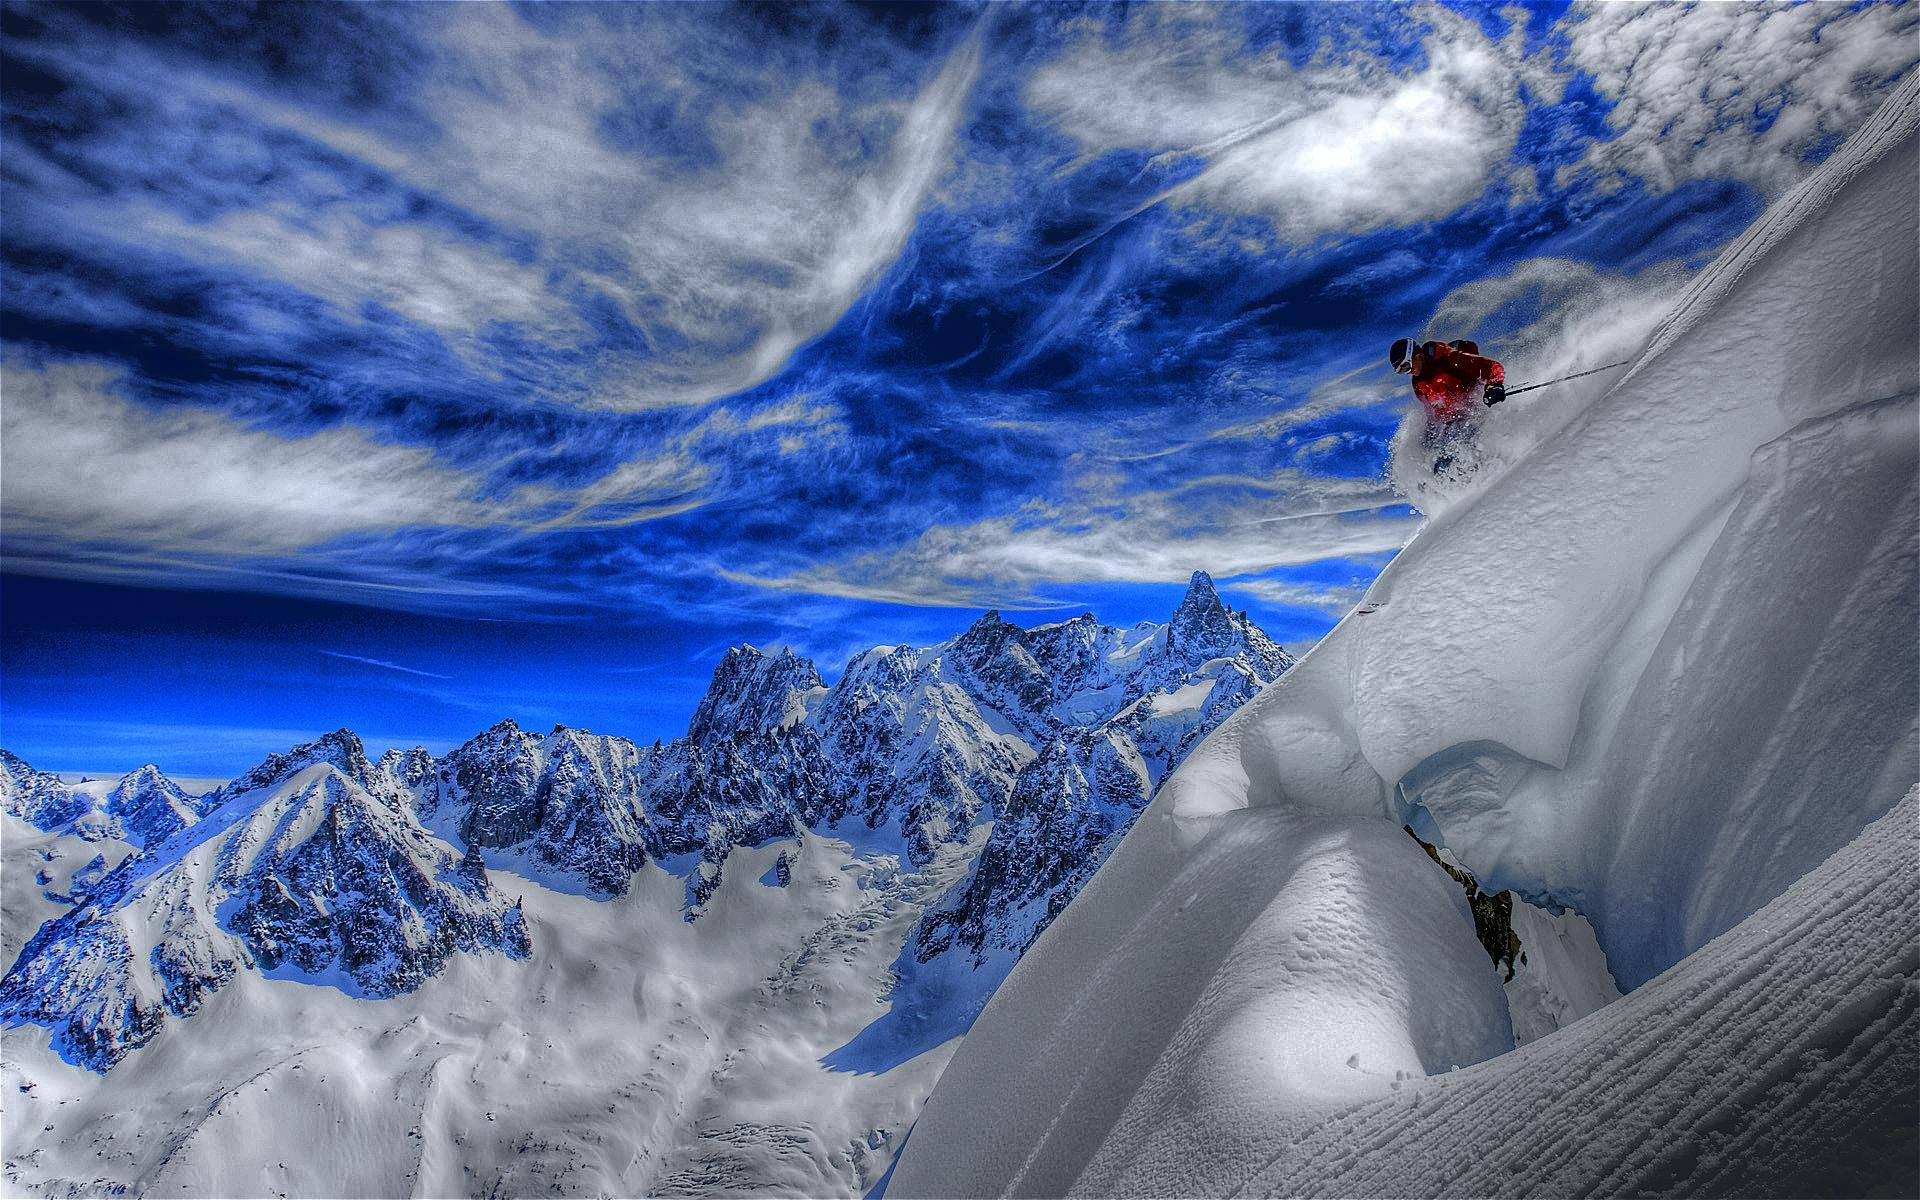 Caption: A Breathtaking View Of Snow Mountain Skiing Background